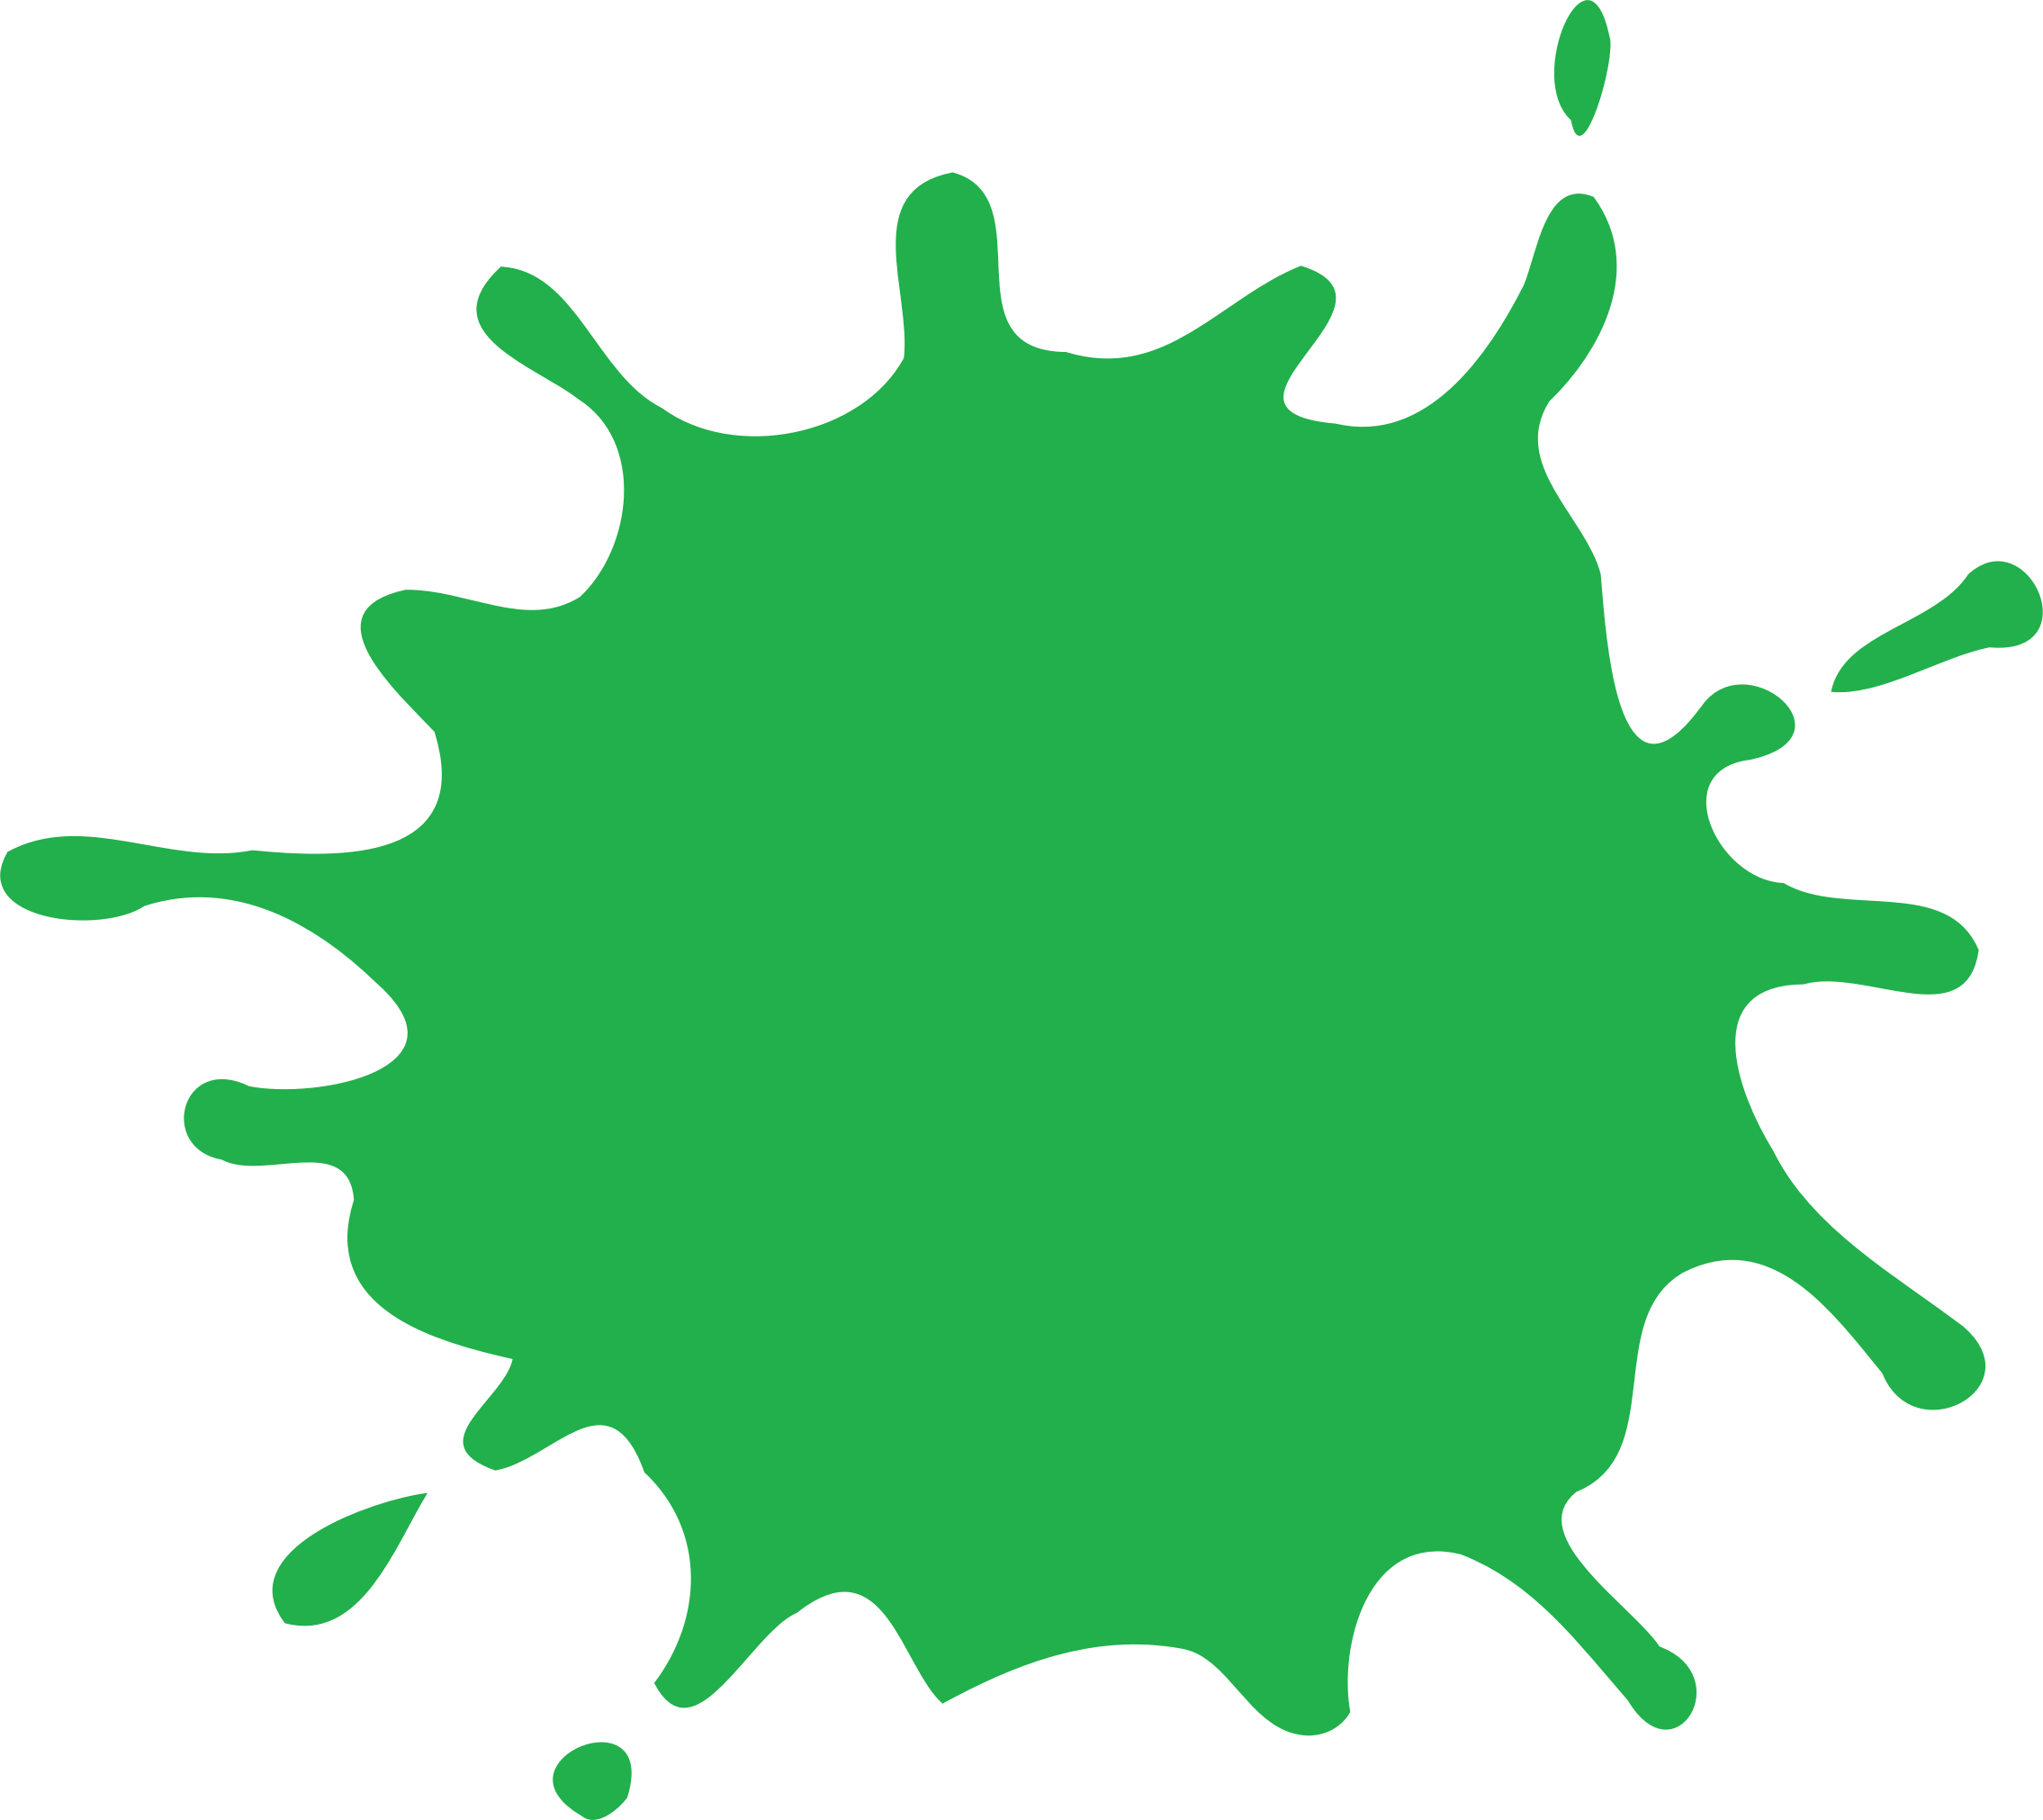 Green splat vector clipart image free png